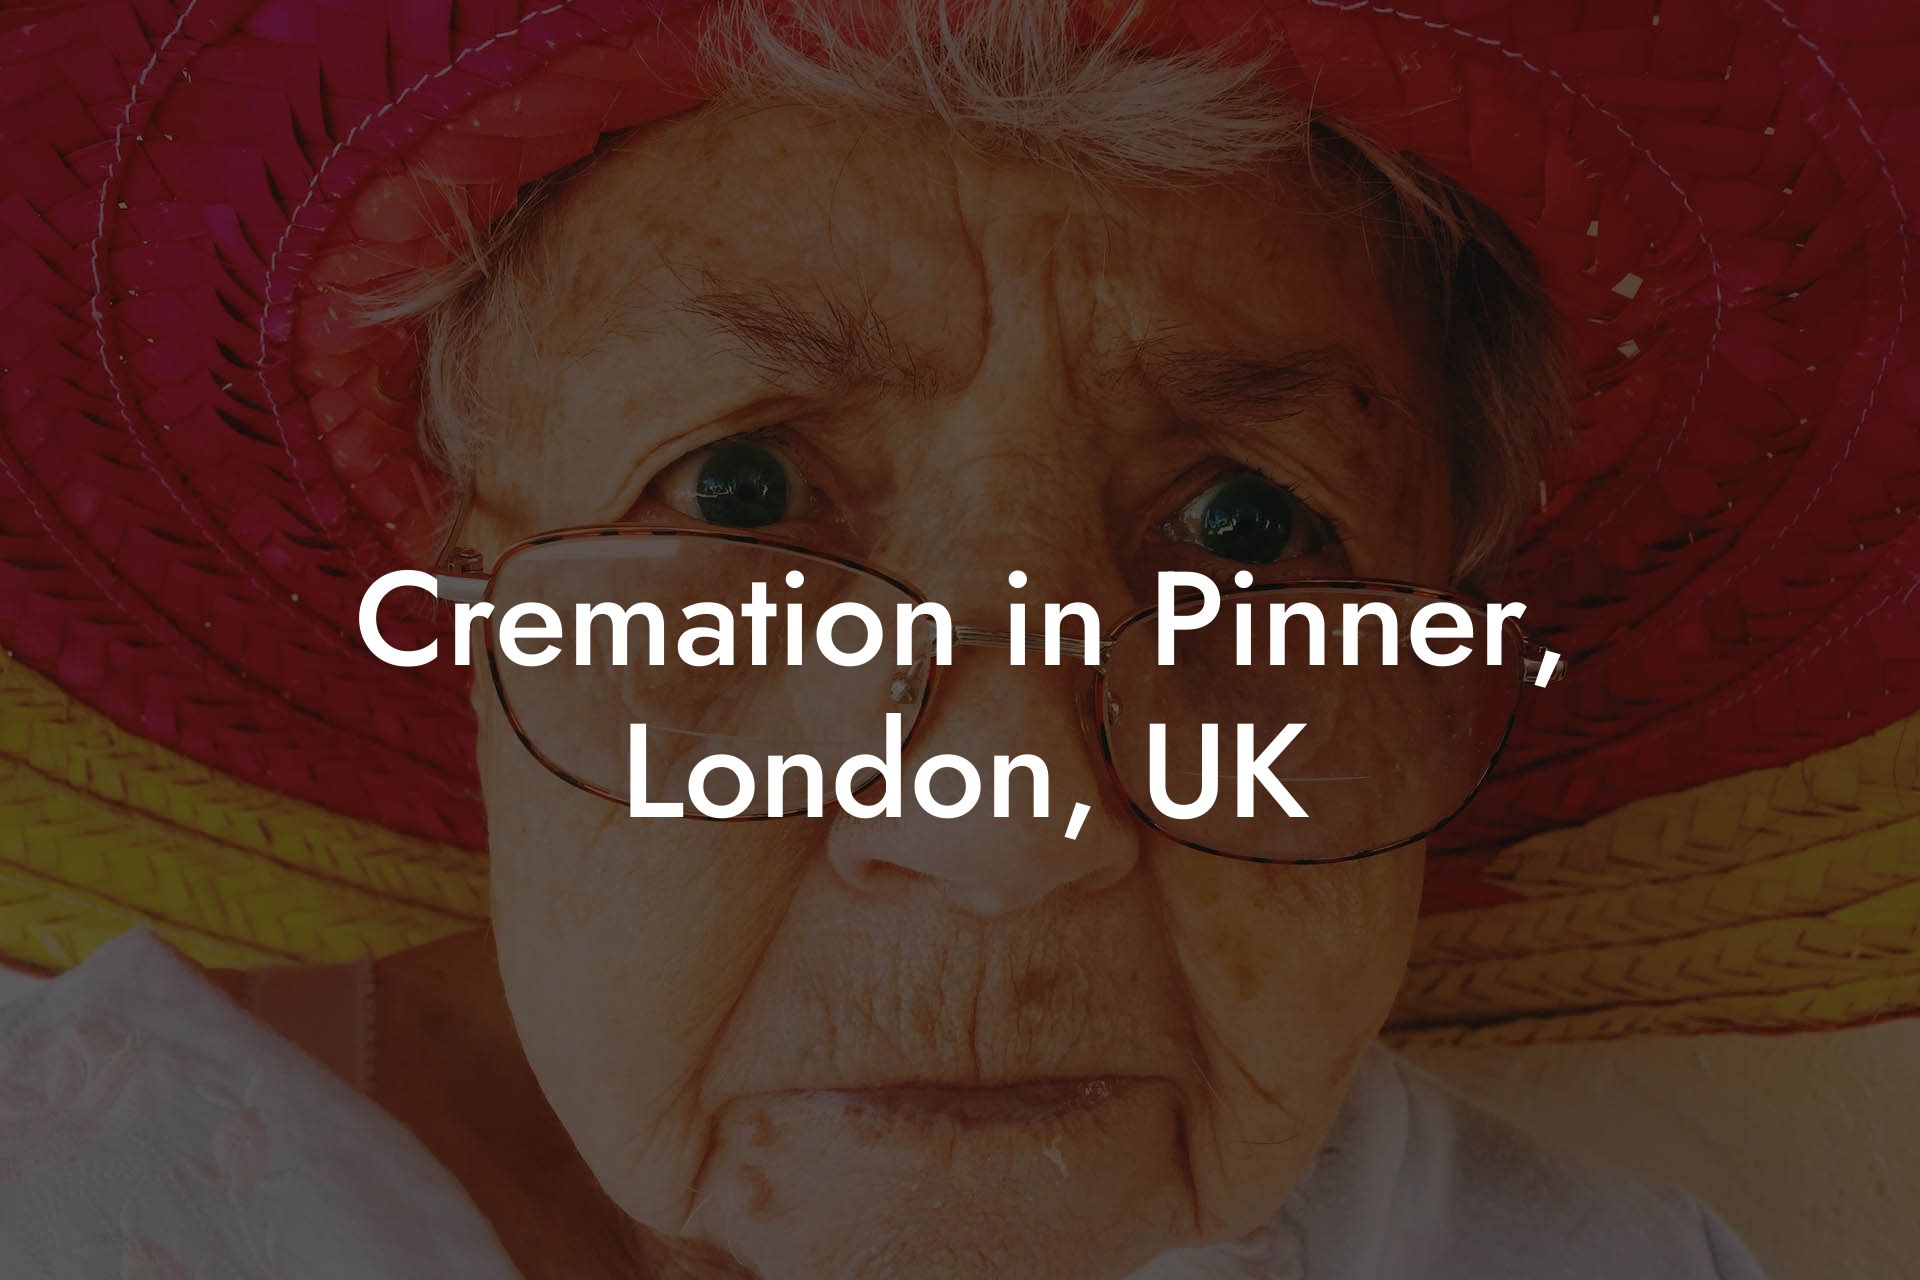 Cremation in Pinner, London, UK